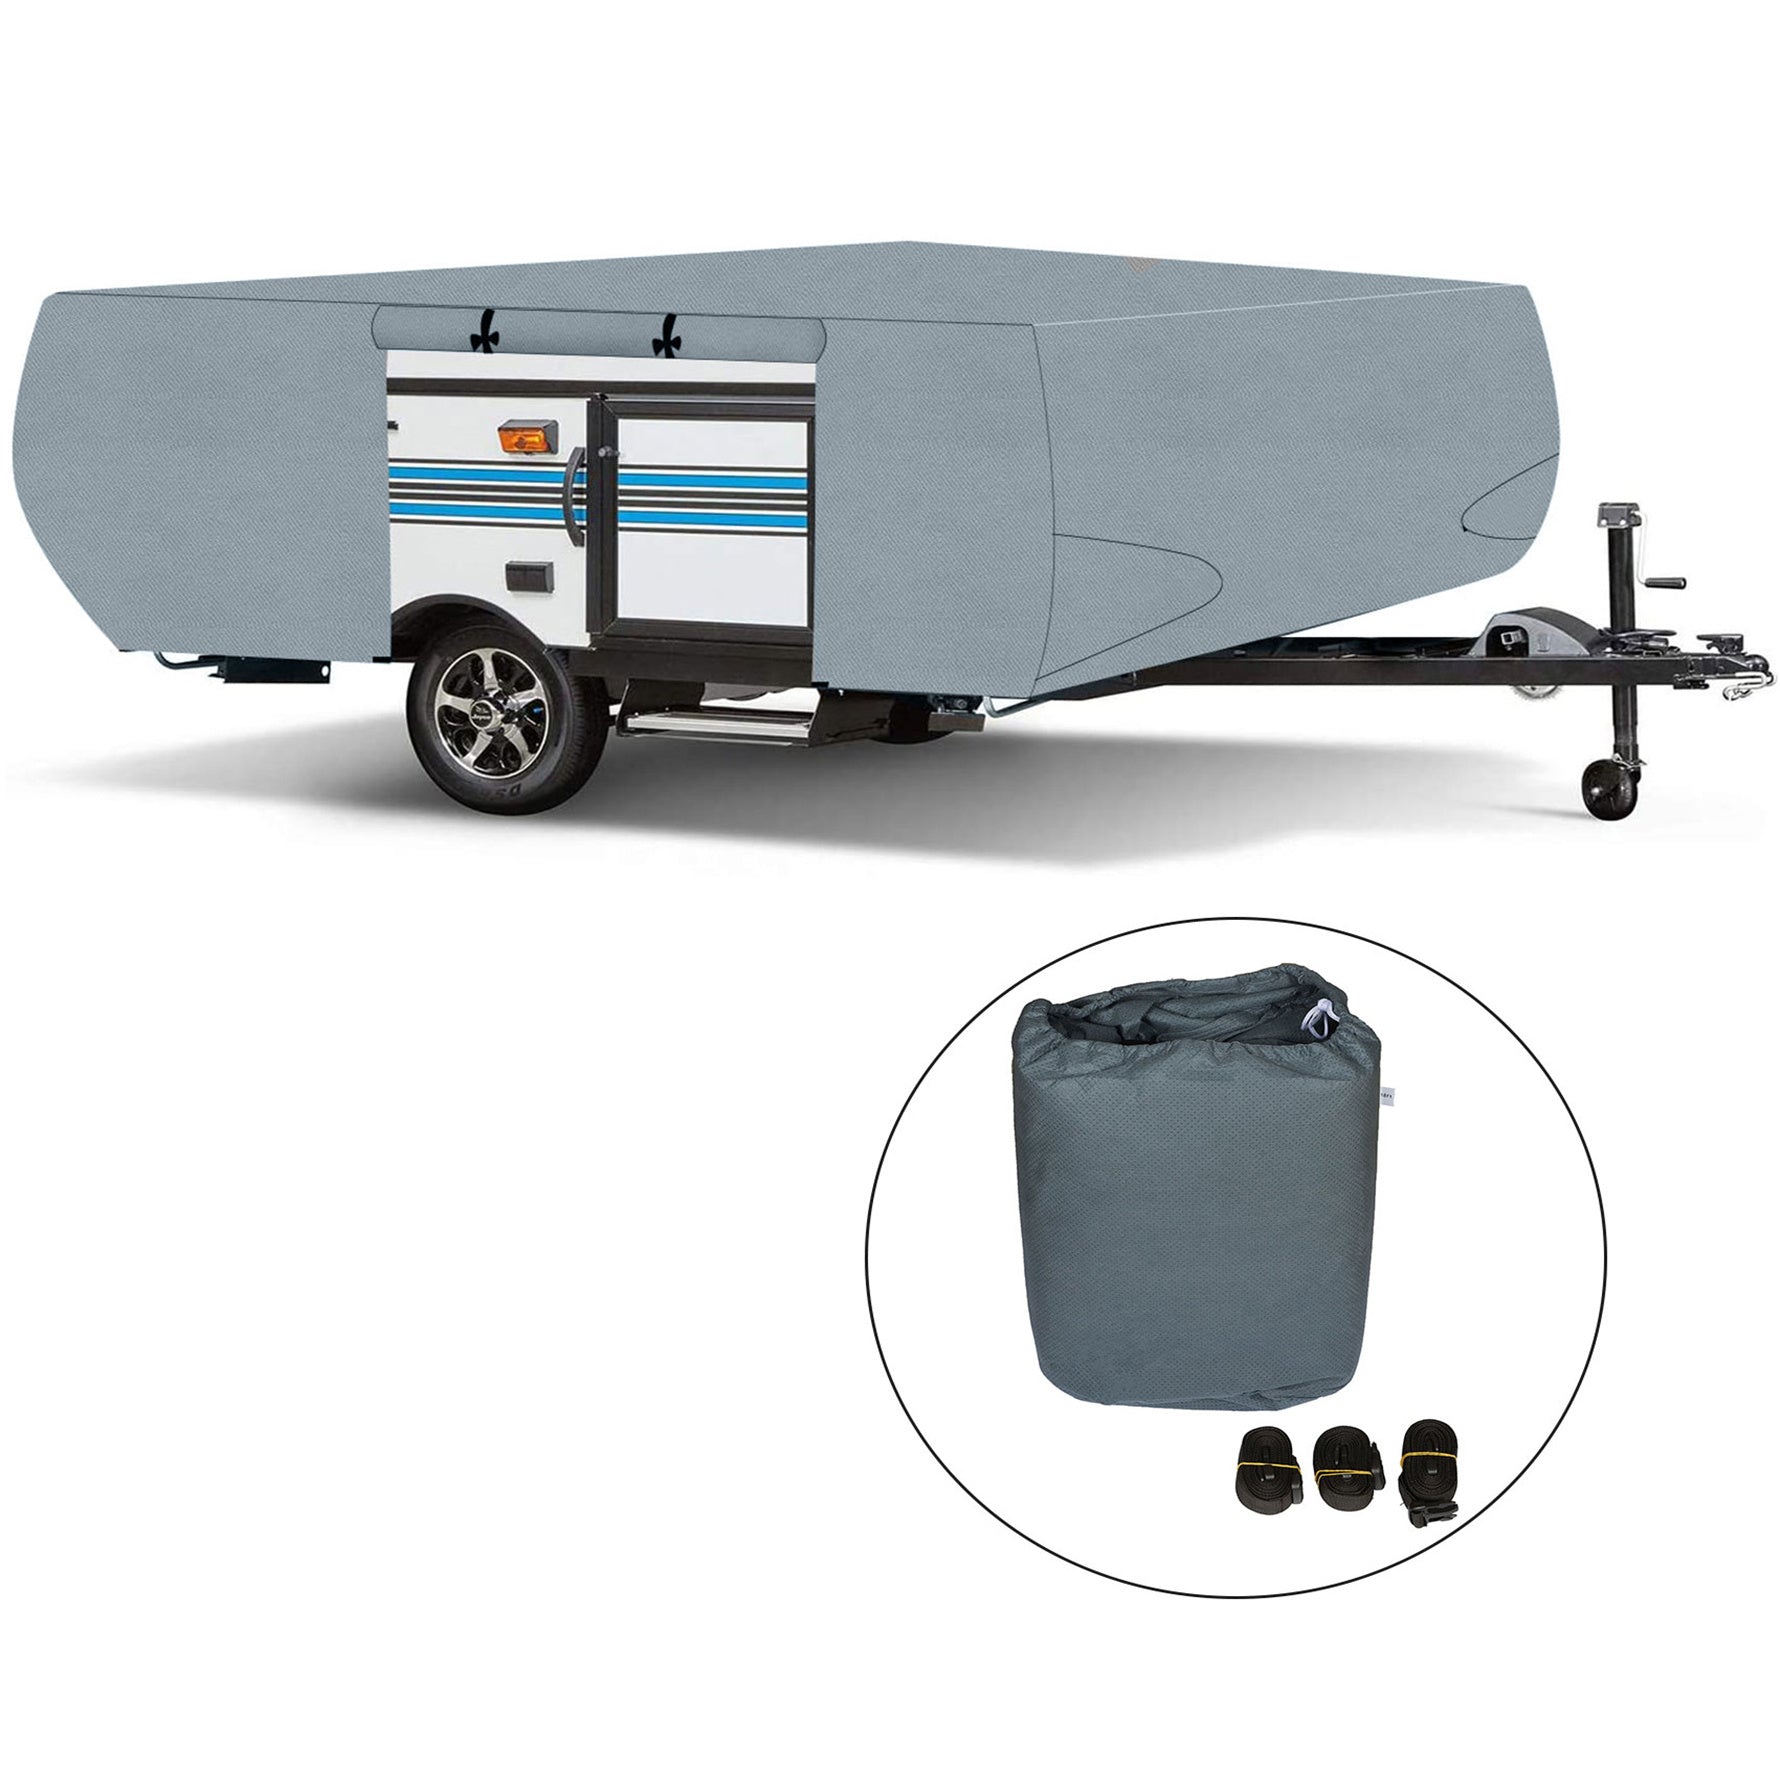 RV Trailer Cover For Folding Pop Up Camper 16-18 FT Trailers Waterproof